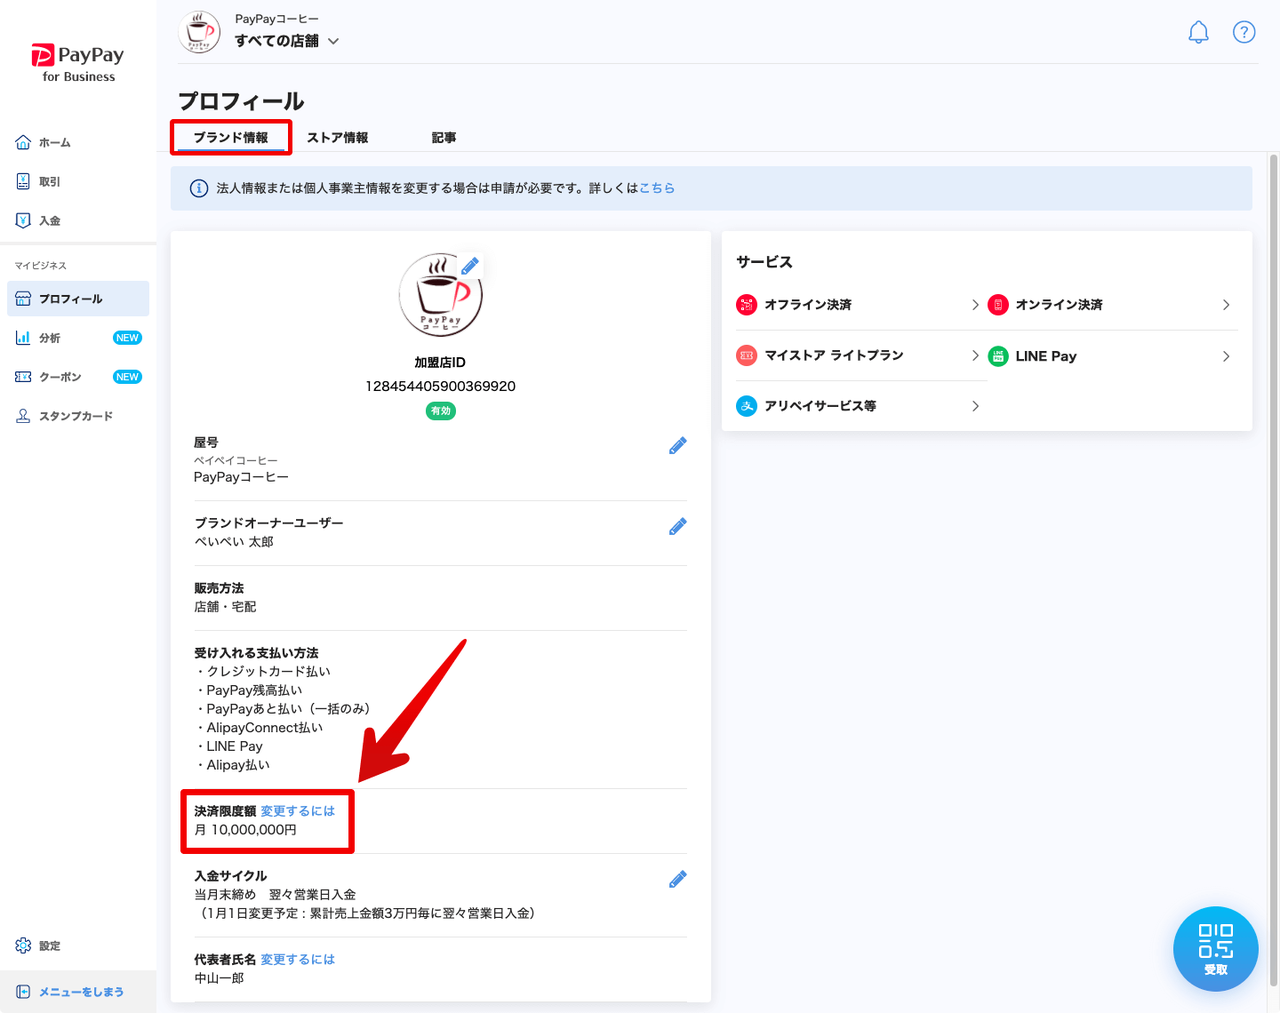 PayPay for Business（加盟店管理ツール）プロフィール画面